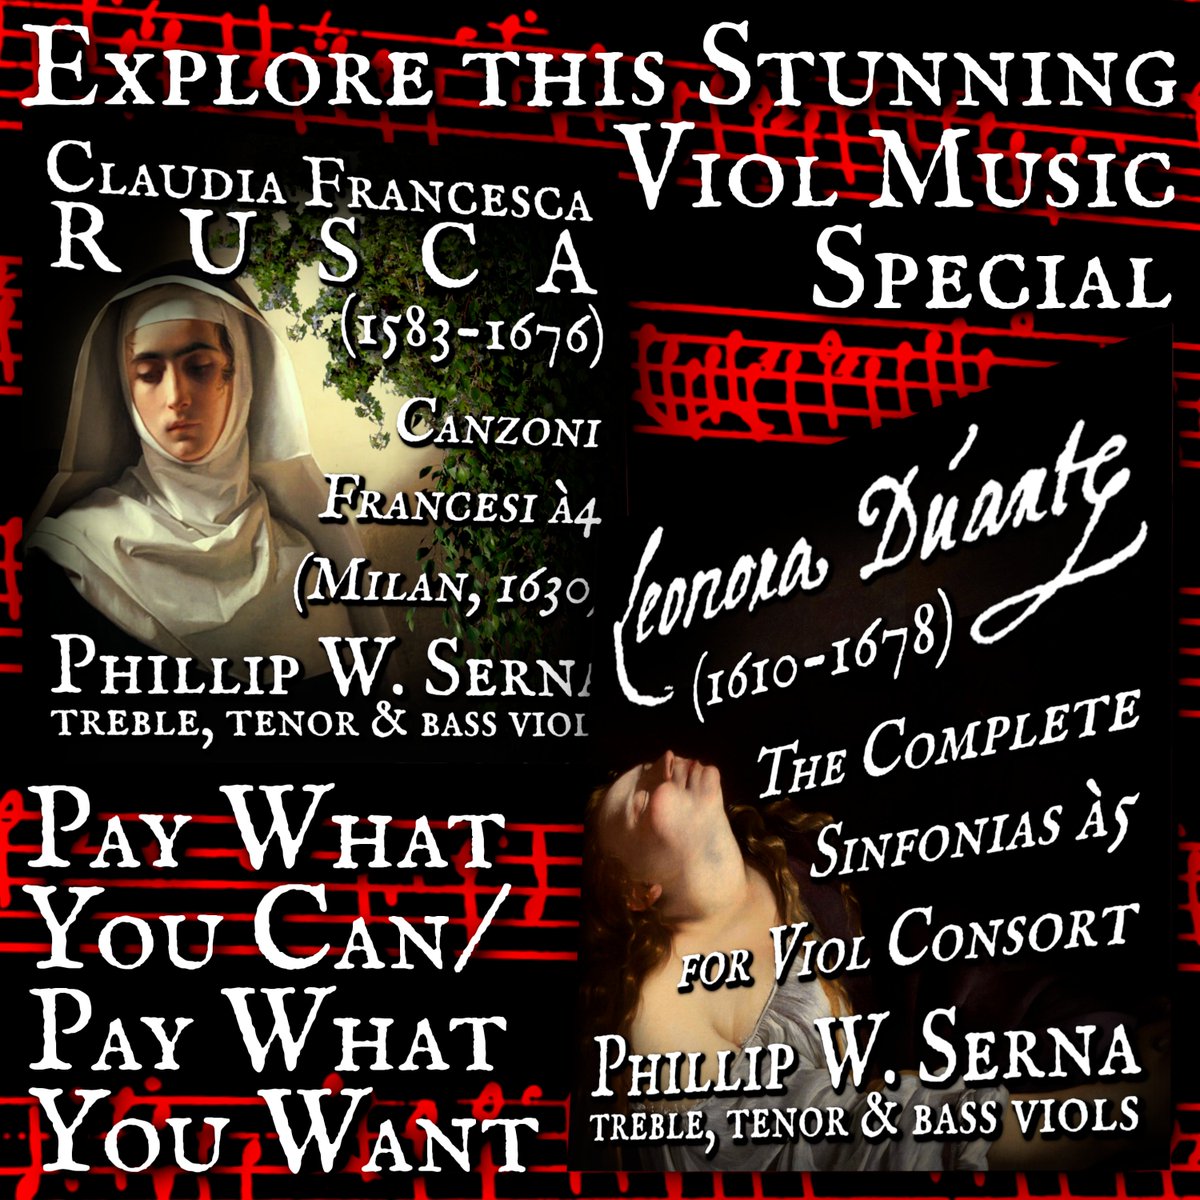 For #EarlyMusicMonth, #WomensHistoryMonth & #InternationalWomensDay, our albums of #EarlyMusic #WomenComposers Claudia #Rusca & Leonora #Duarte will be available #PayWhatYouCan/ #PayWhatYouWant exclusively on @Bandcamp/ @BandcampC

ffm.to/claudiafrances…
ffm.to/leonoraduarte